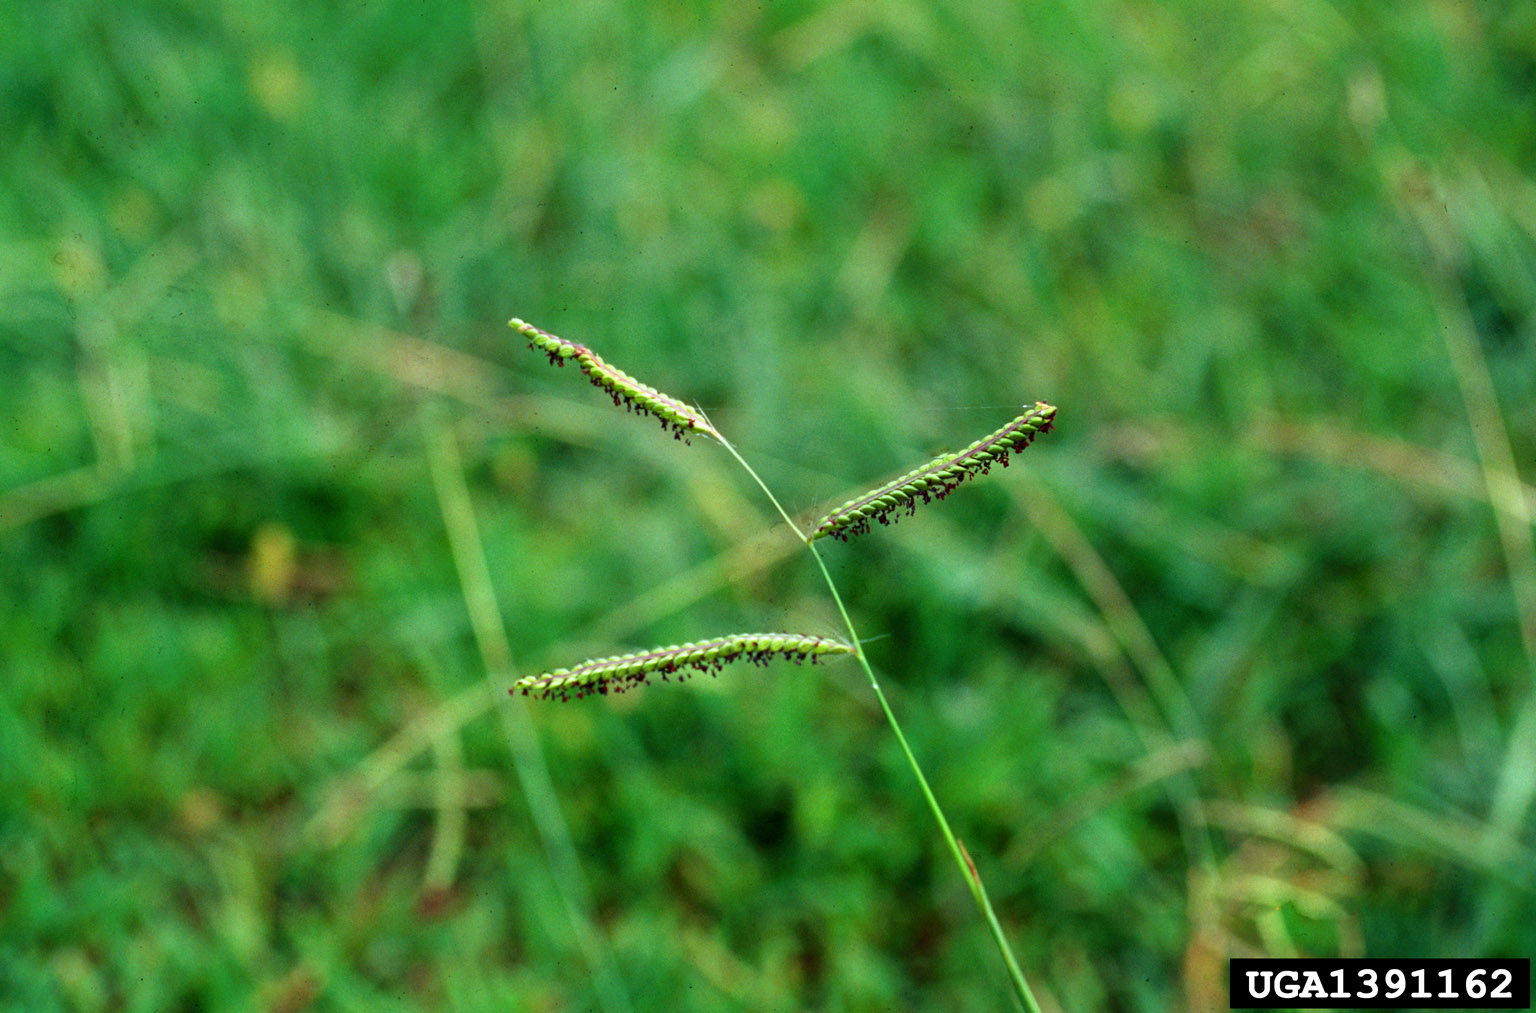 Photograph showing a close-up of a dallisgrass inflorescence. The photo shows the tip of a single grass stem with three branches bearing spikelets. Short, black structures hand down from the spikelets.